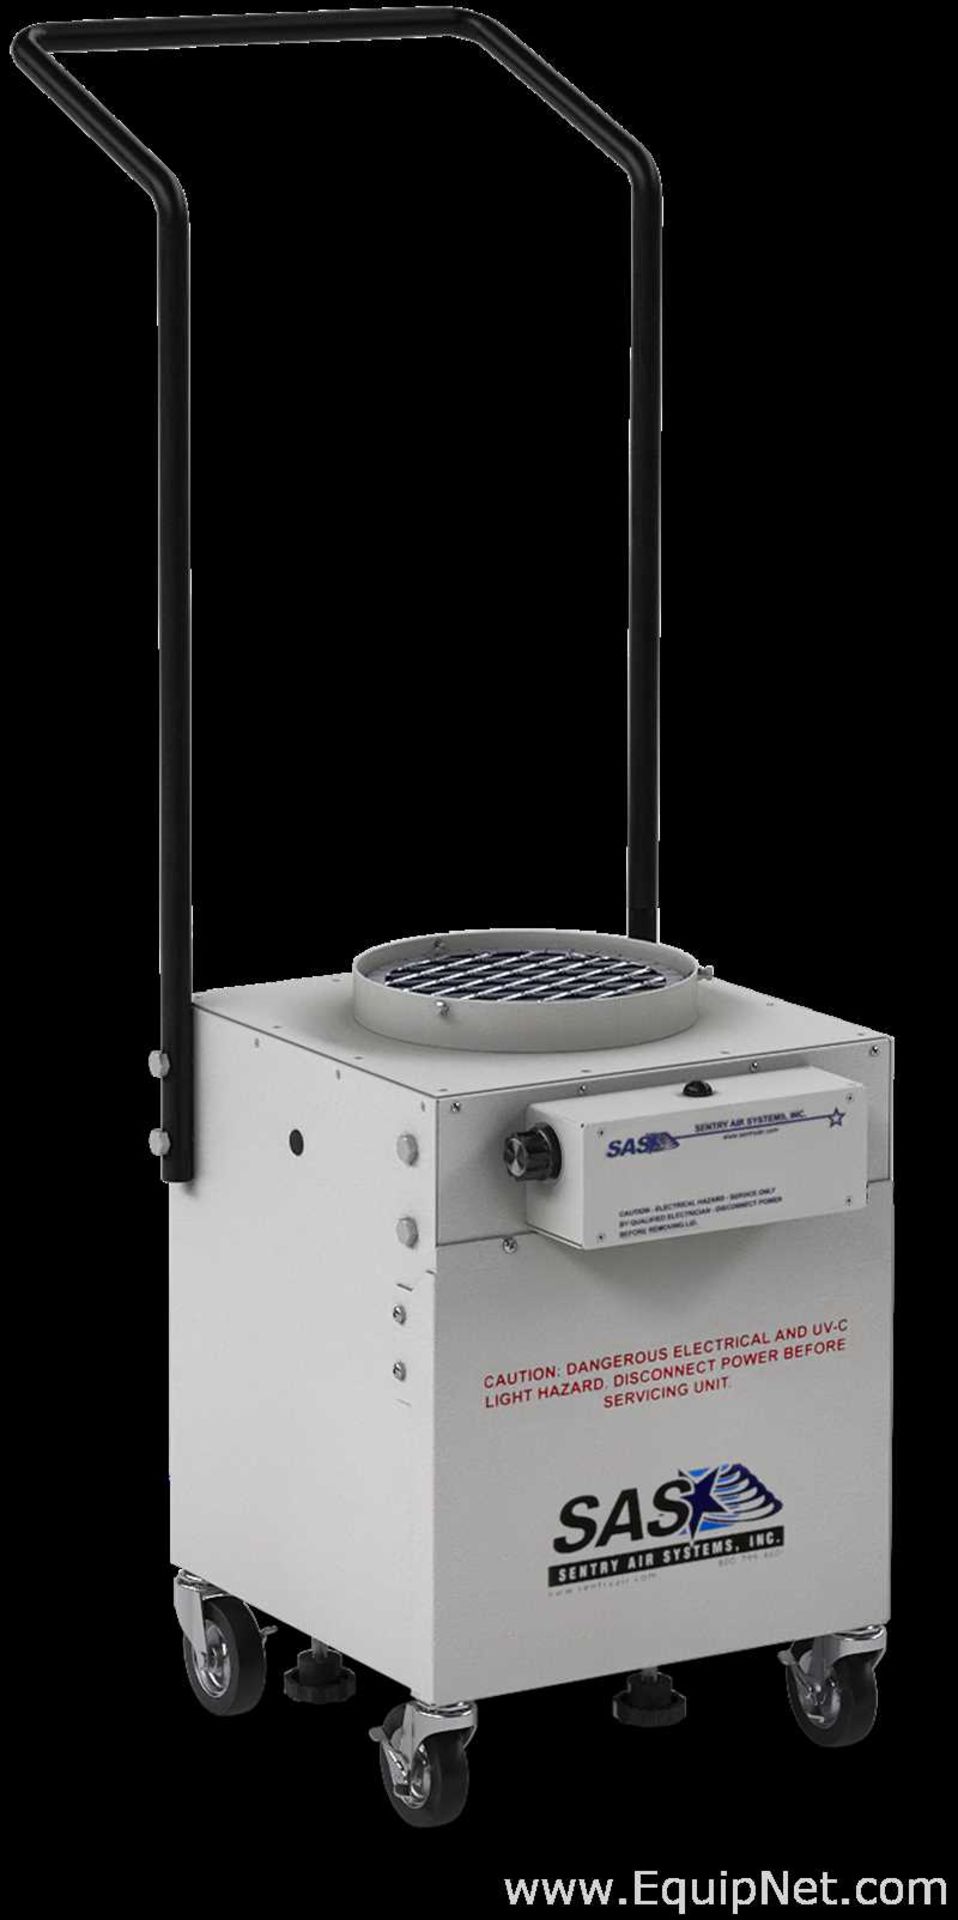 Sentry Air Systems SS-300-ULPA Air Quality System - Image 3 of 4